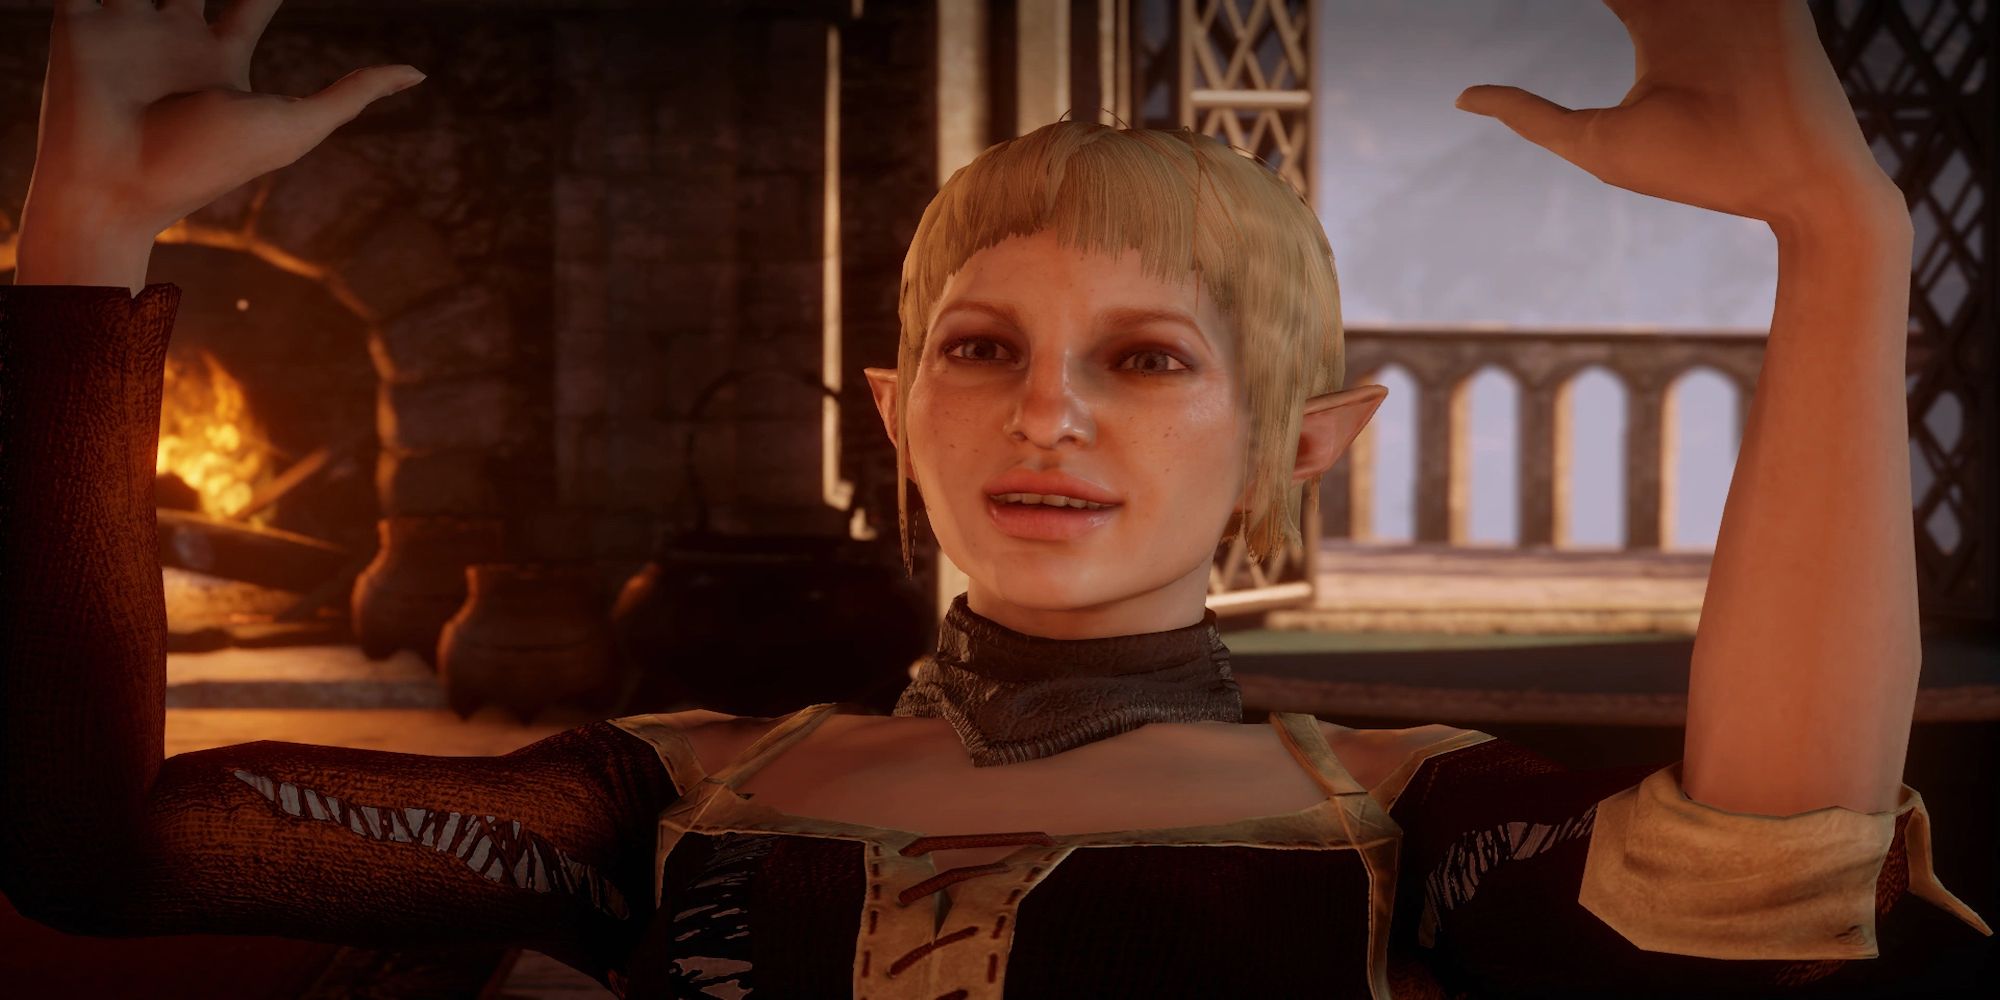 Sera talking to someone off-screen (Dragon Age: Inquisition)